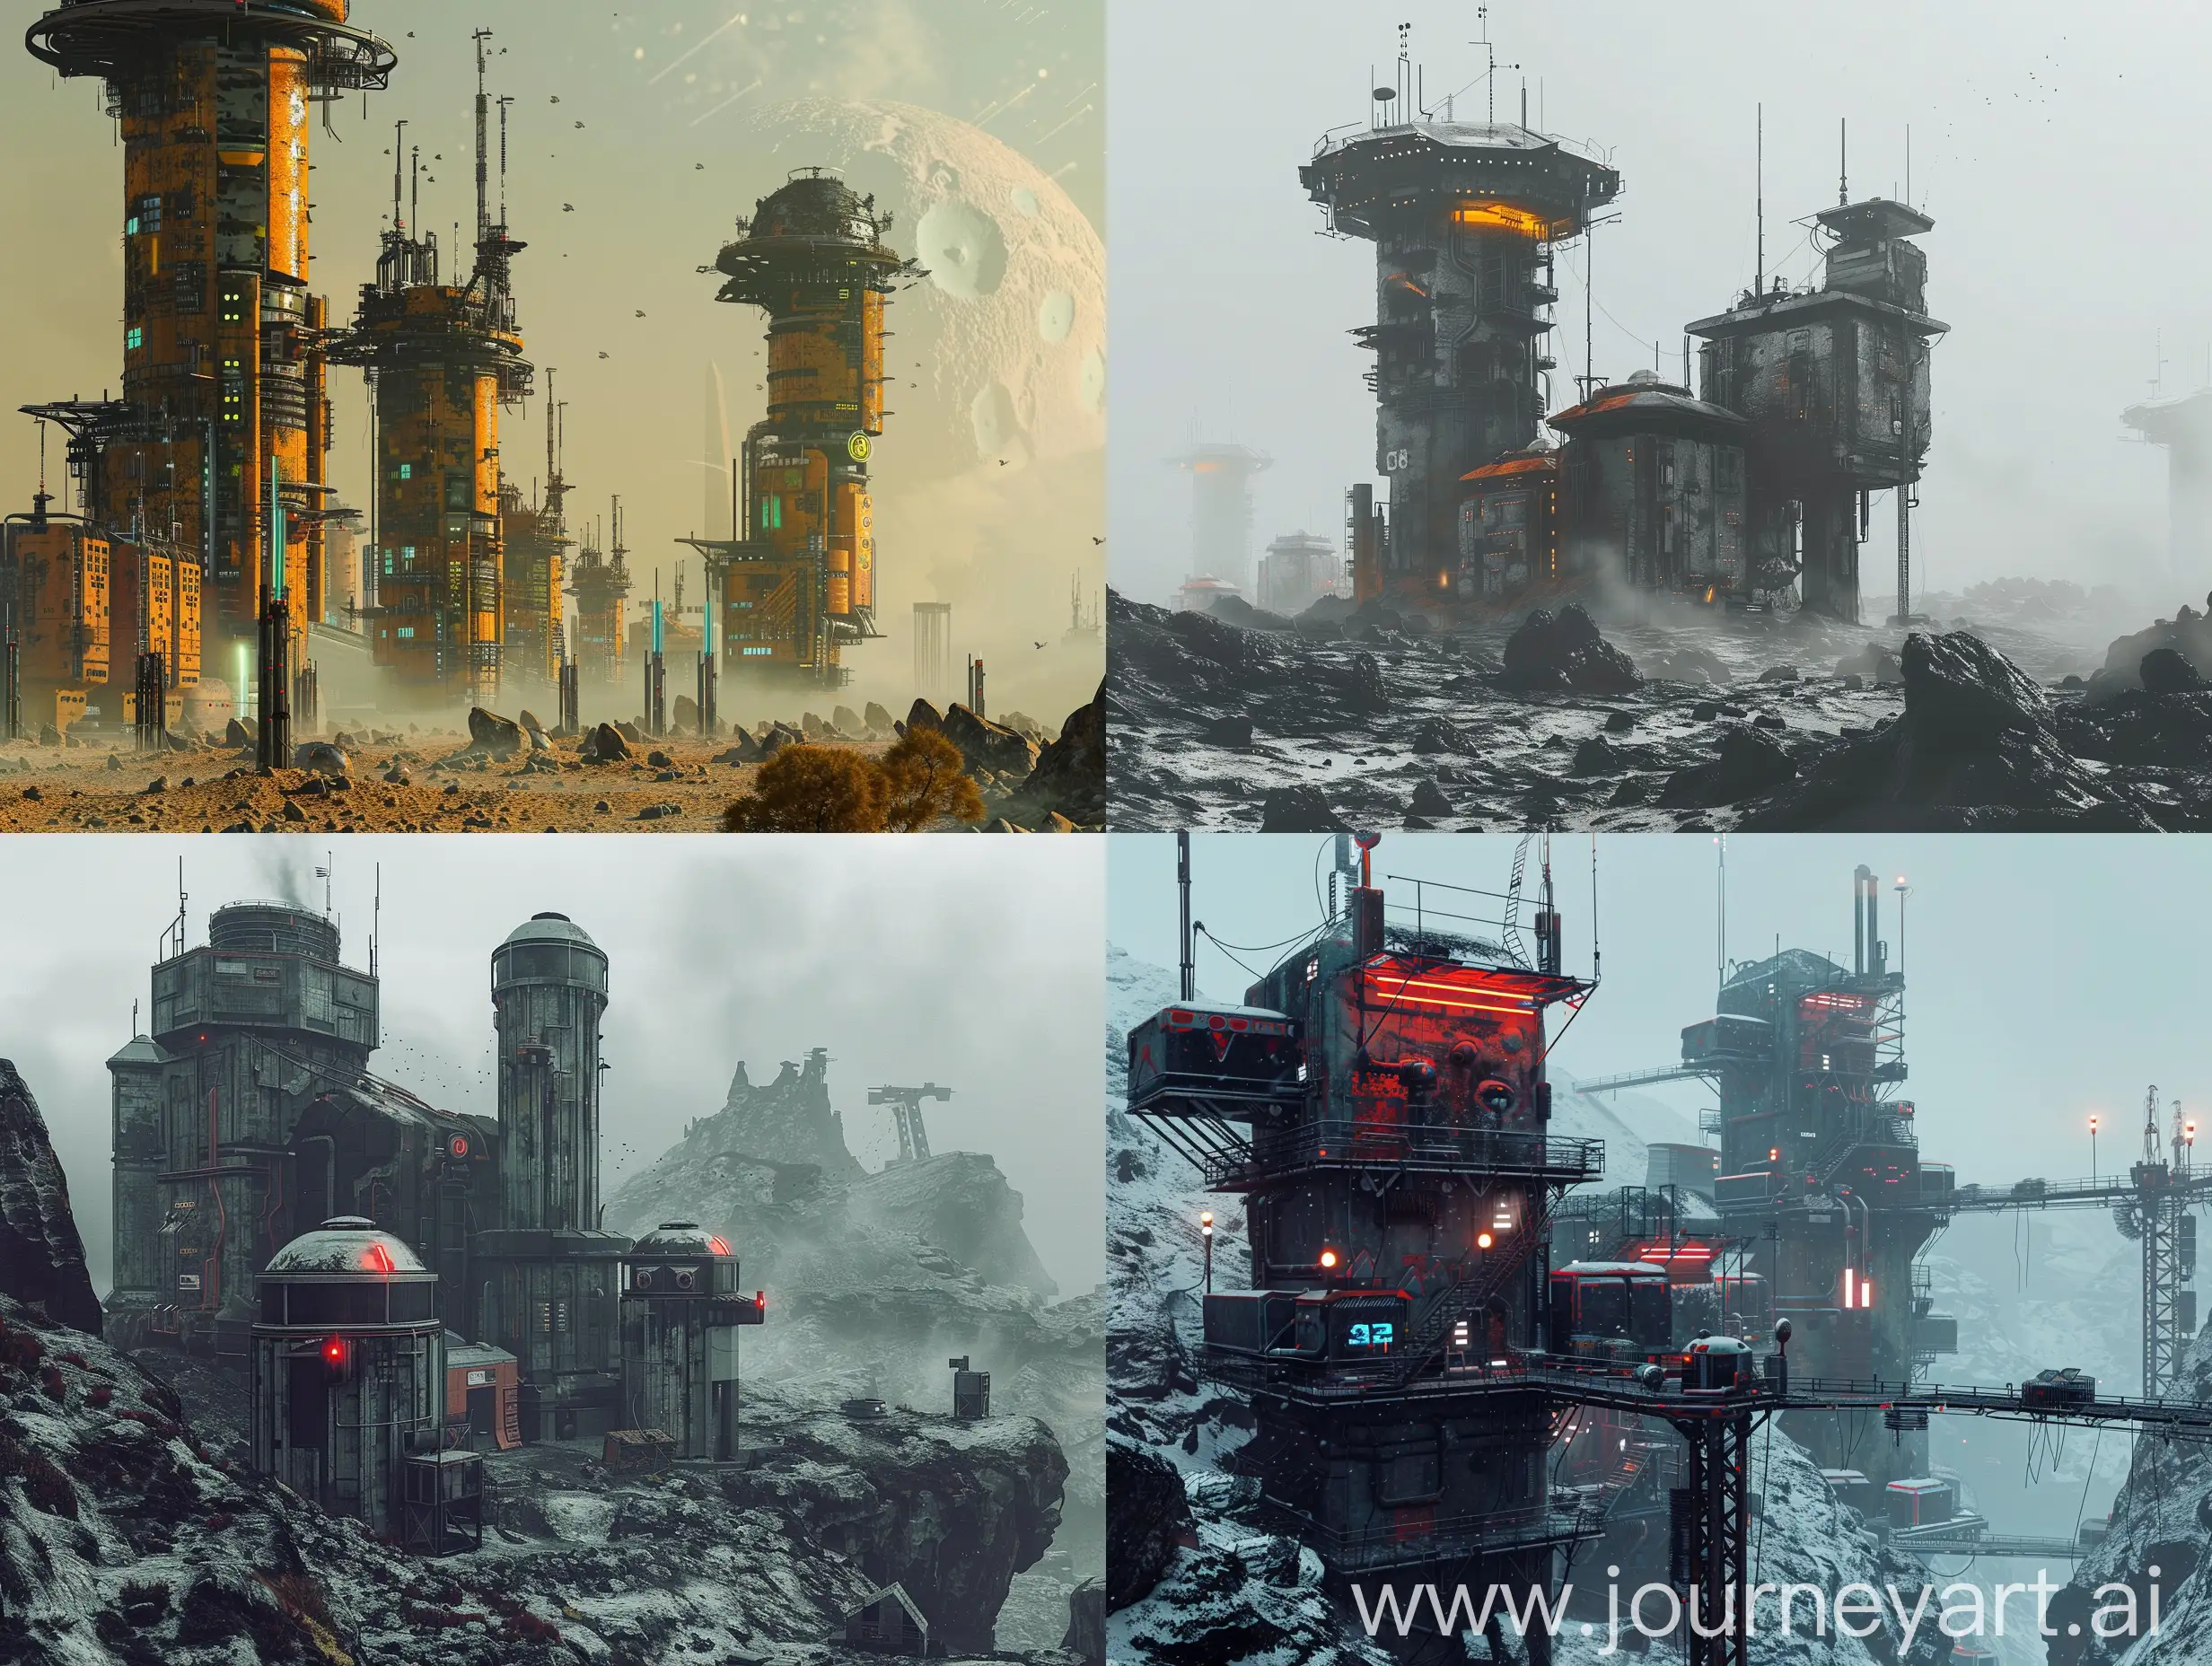 a outpost in the middel of a Rocky world covered with artificial structures. The thin atmosphere consists mostly of industrial pollutants. There are strong energy emissions coming from across the entire surface, but no organic life signs., towering out posts, settlemnt, urban outpost, minimalist 